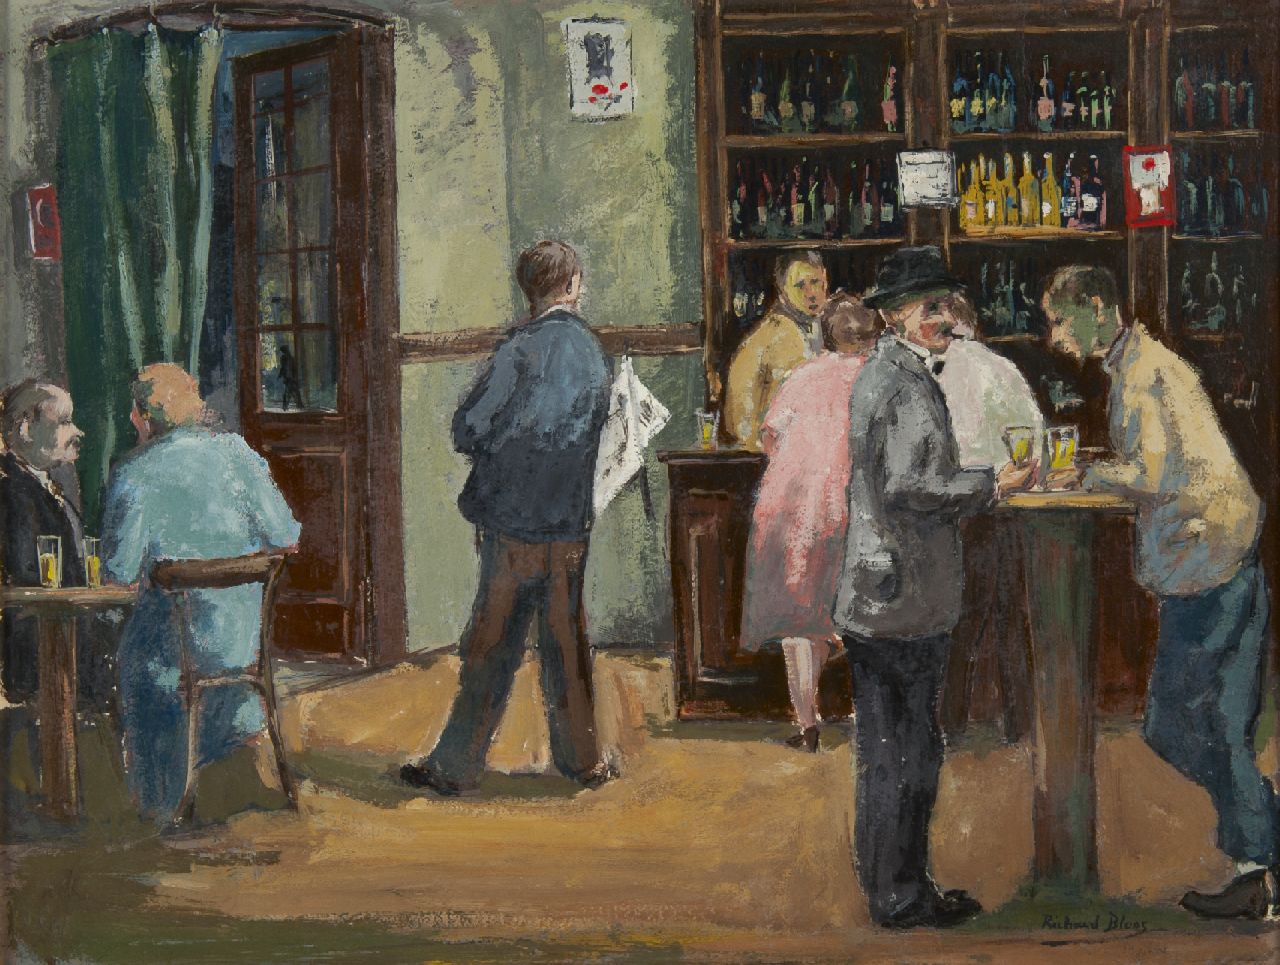 Bloos R.W.  | 'Richard' Willi Bloos, Bar in Montmartre, oil on paper 32.0 x 42.0 cm, signed l.r.